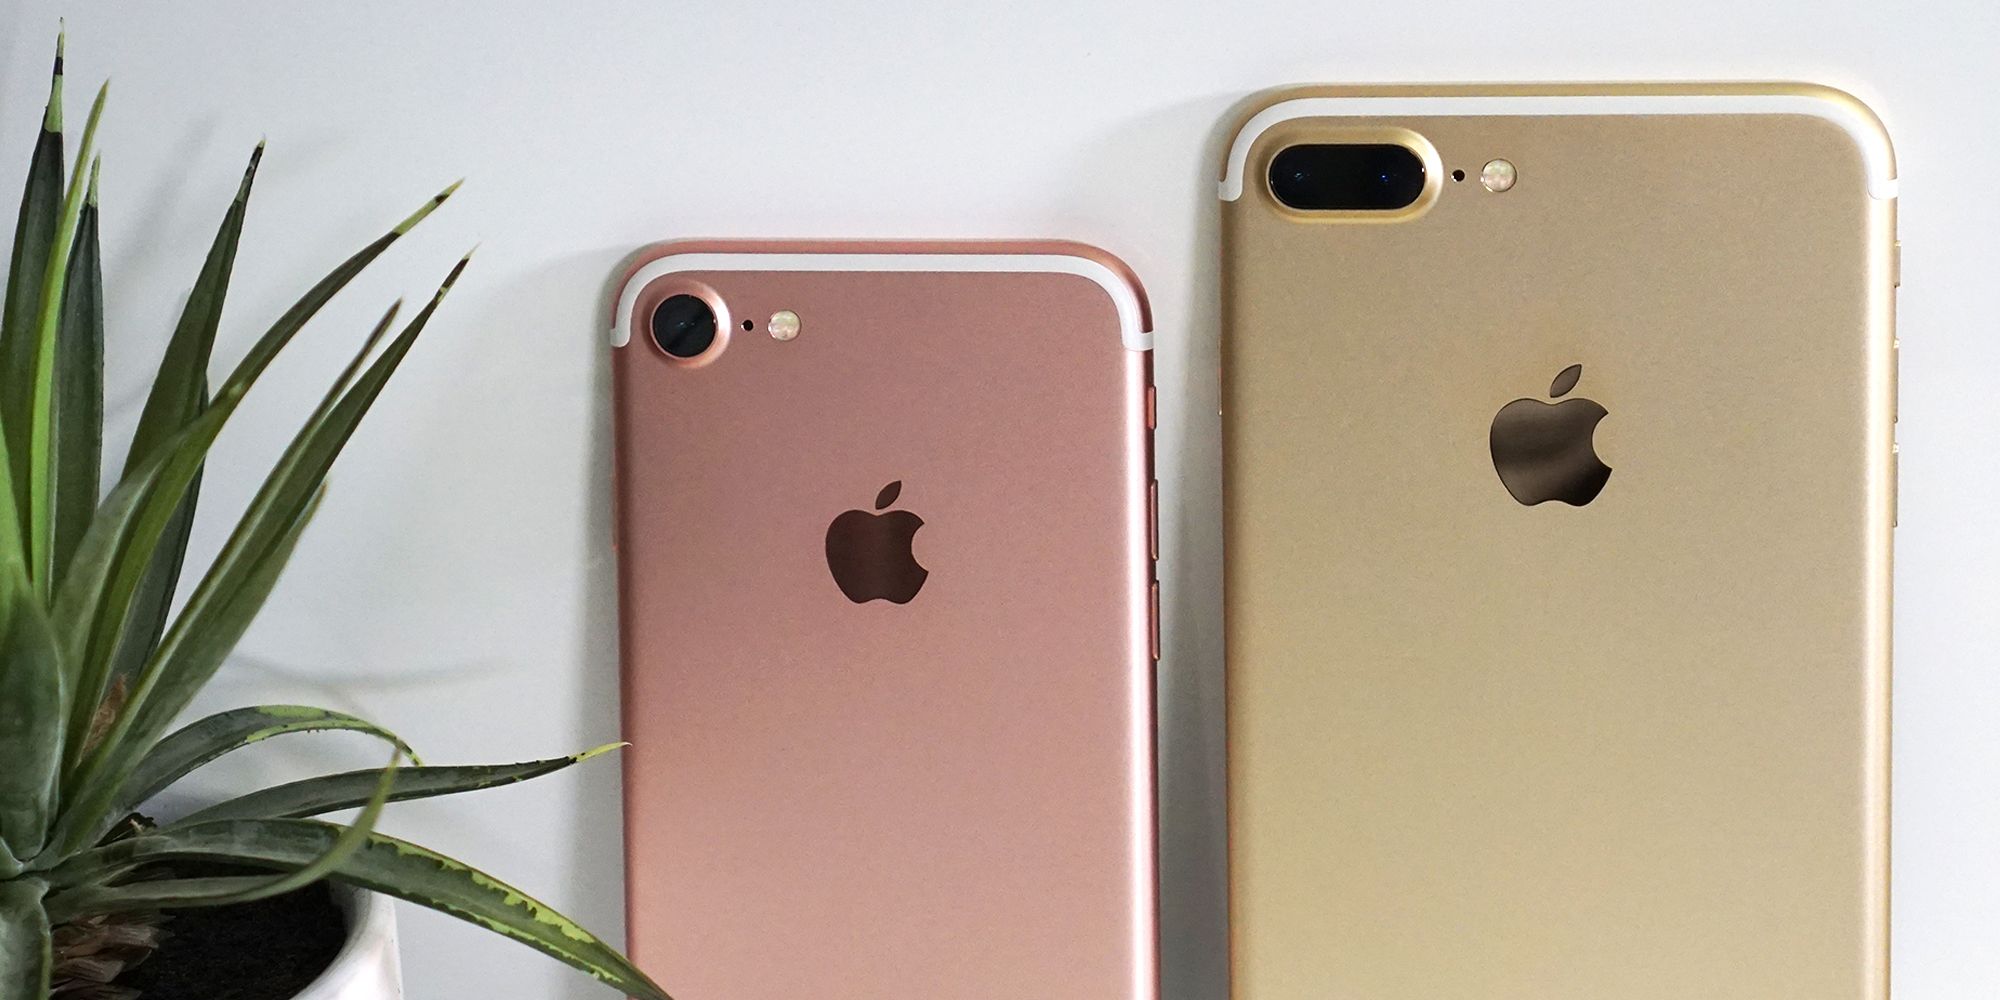 Apple iPhone 7 and iPhone 7 Plus Smartphone Reviews 2016-2017